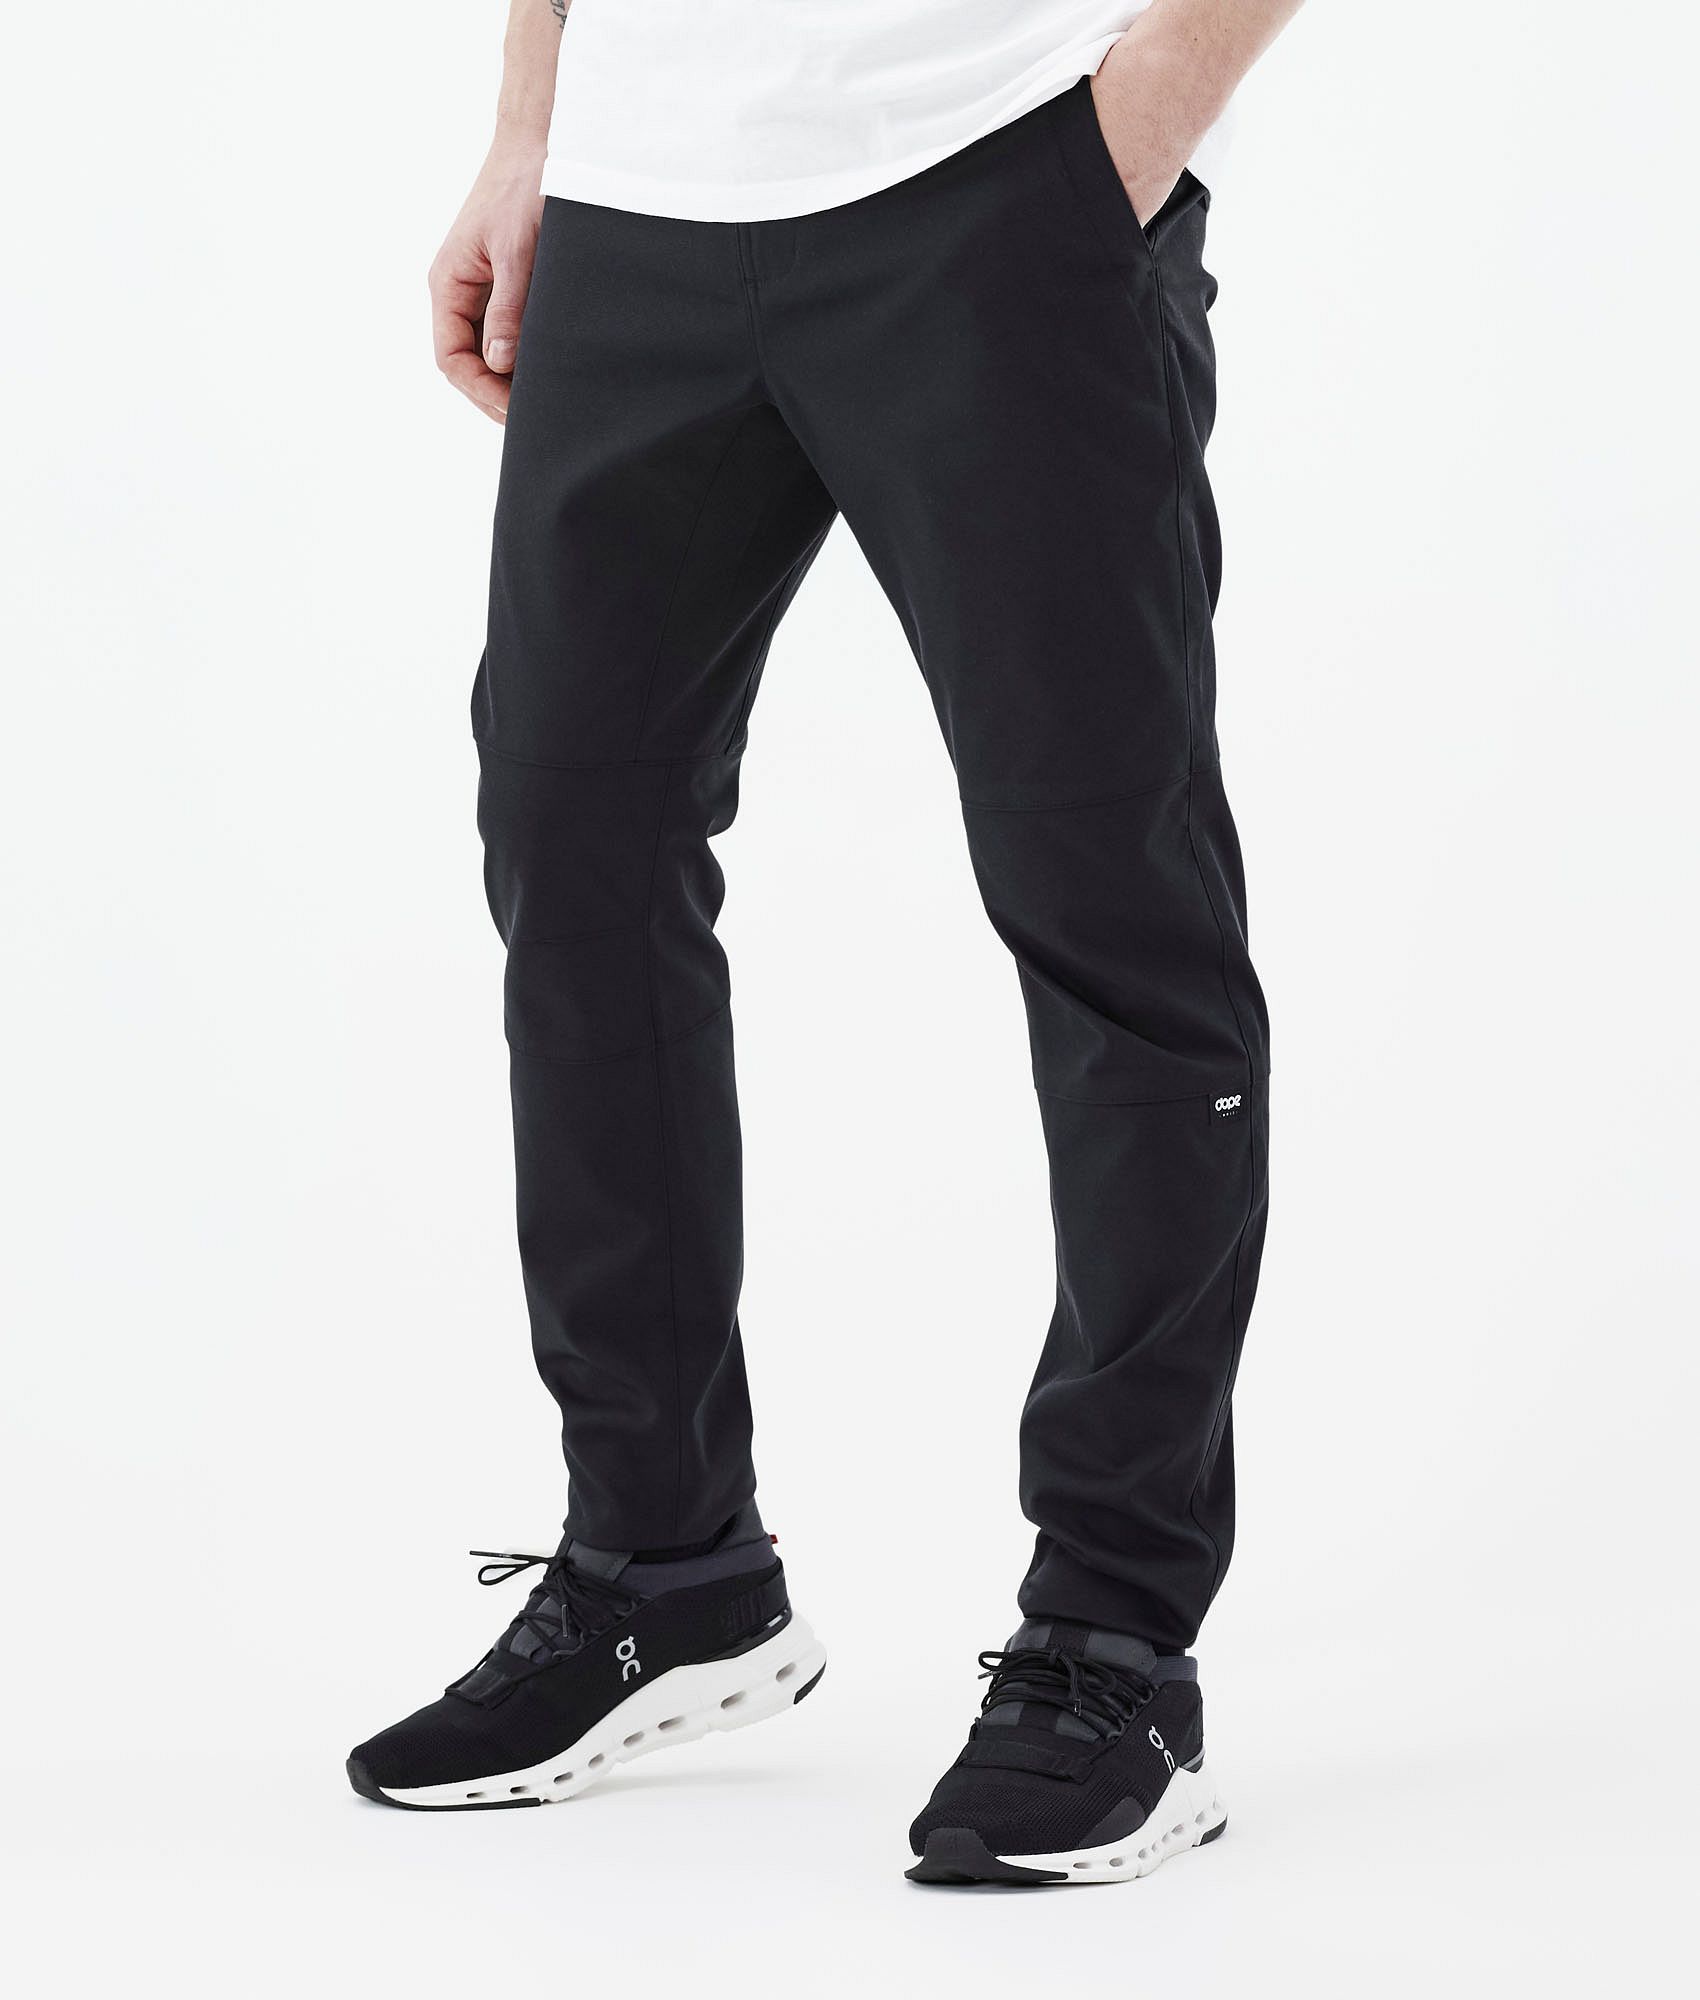 Buy men's trousers and chinos online | MEYER-trousers